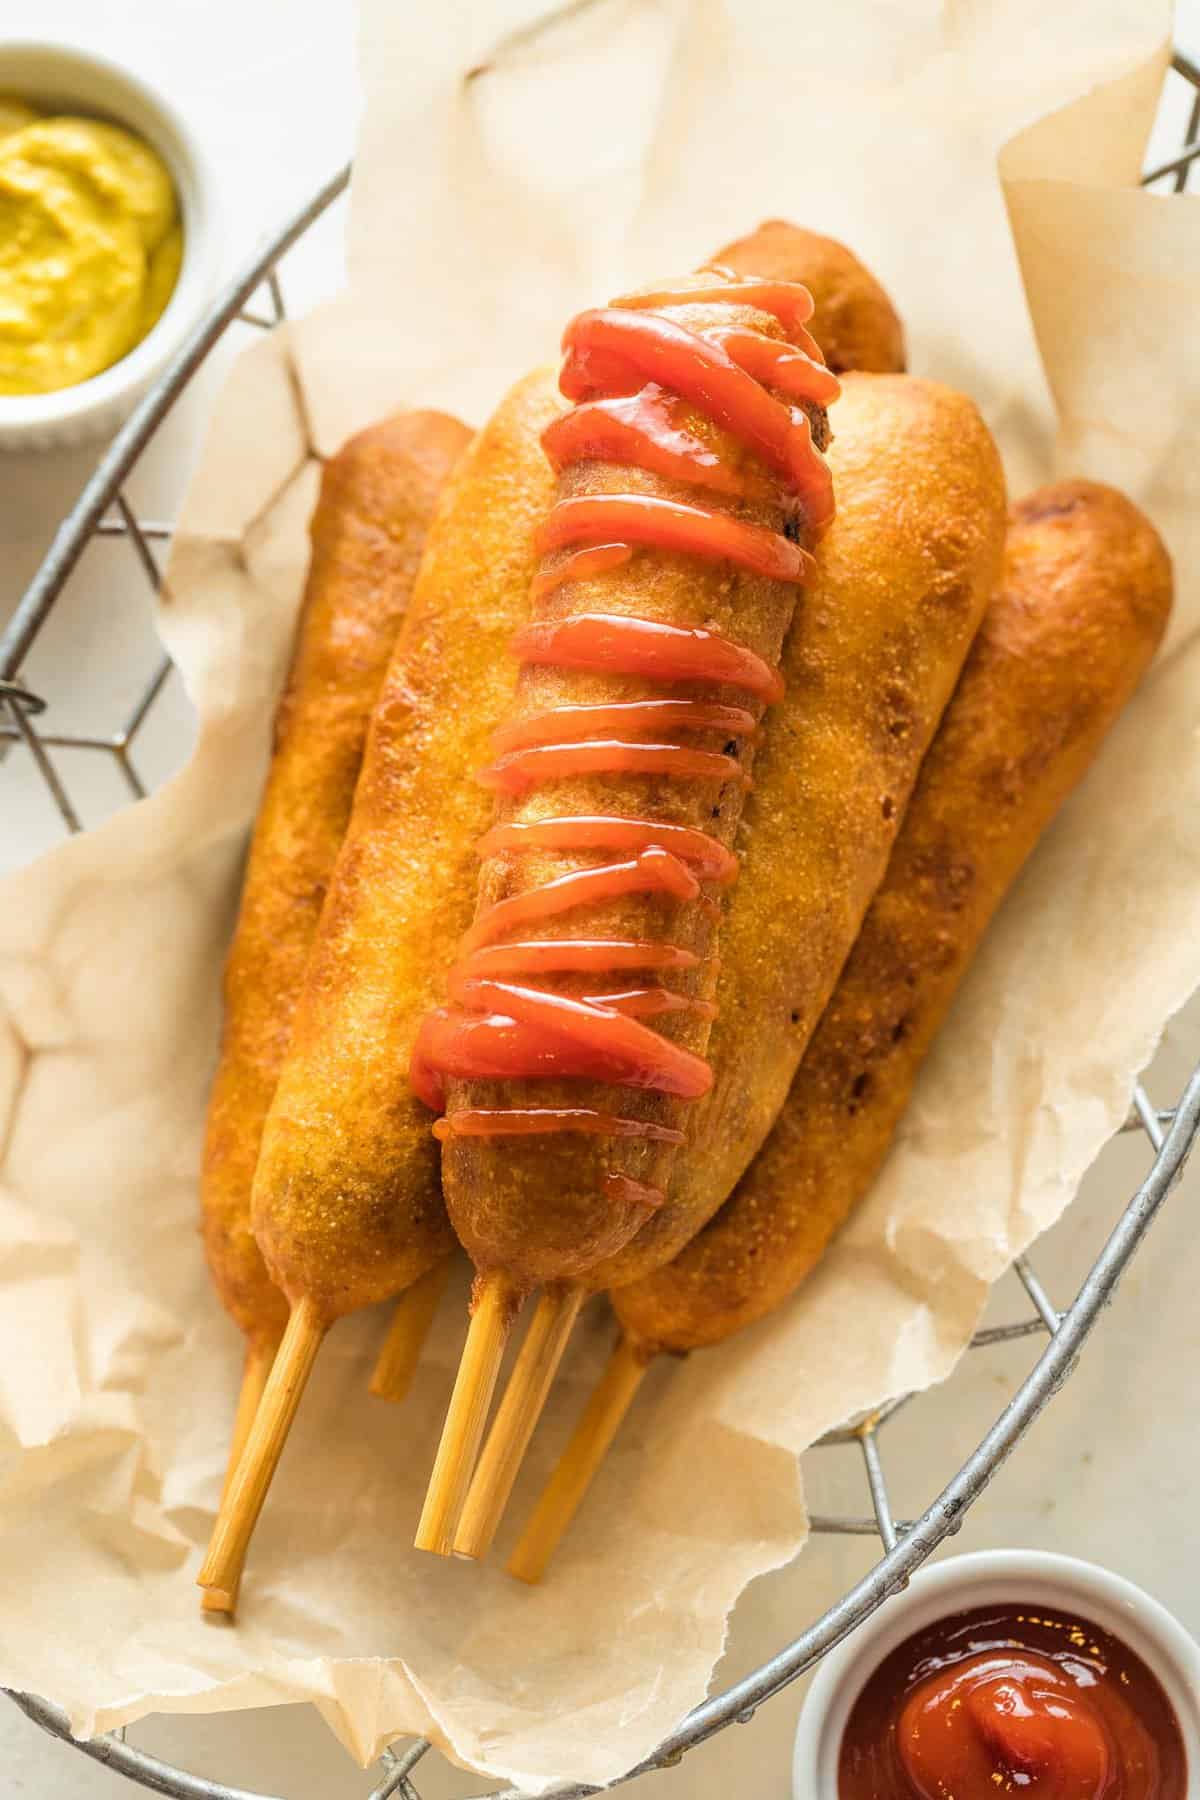 Corn dogs on a platter with a drizzle of ketchup.